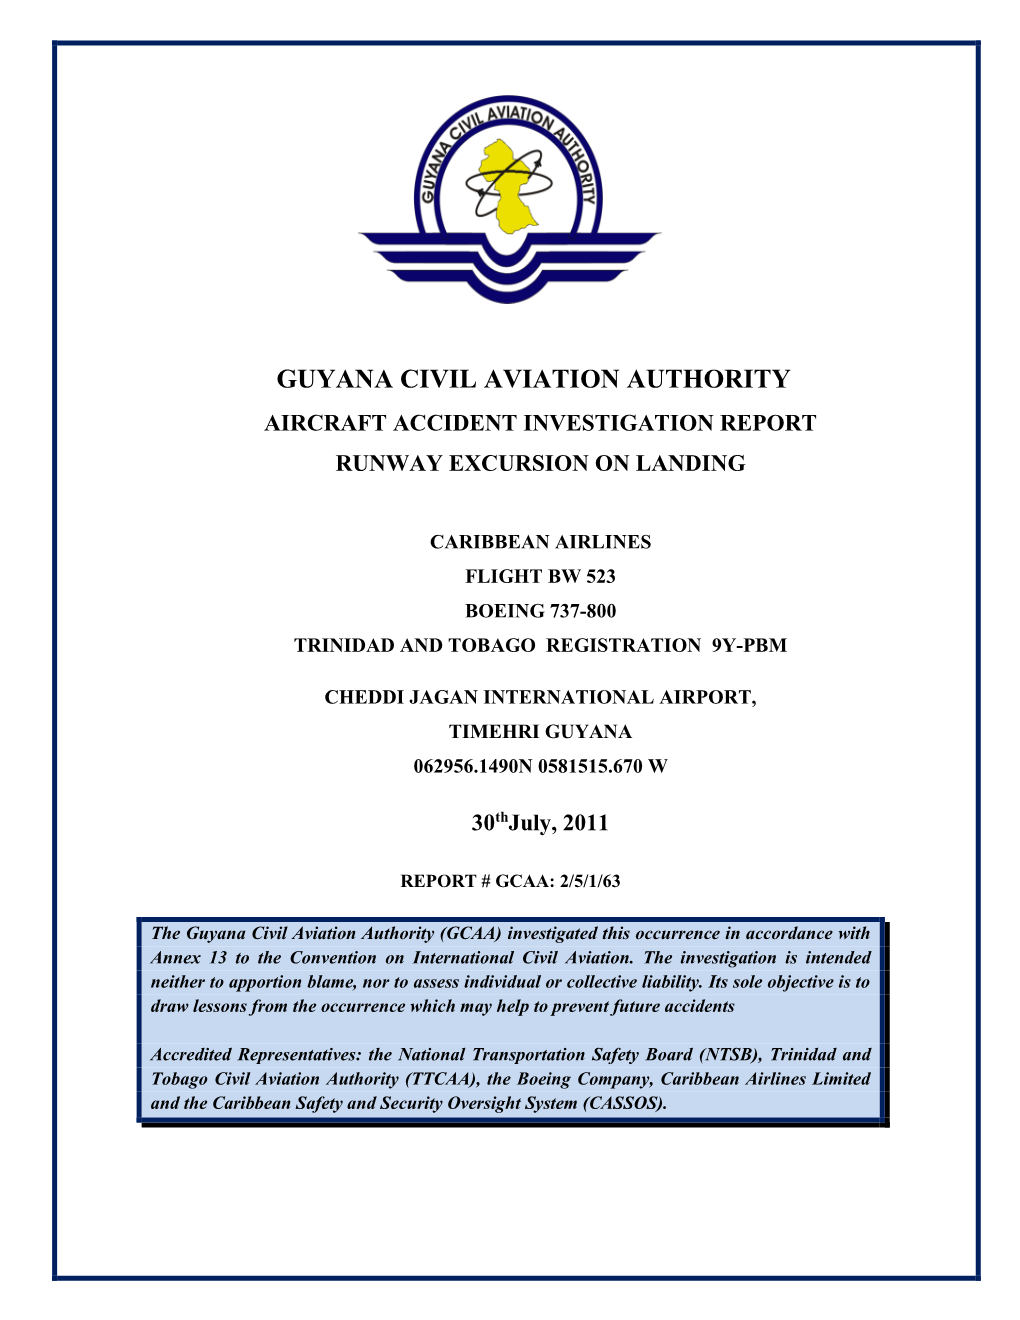 Guyana Civil Aviation Authority Aircraft Accident Investigation Report Runway Excursion on Landing